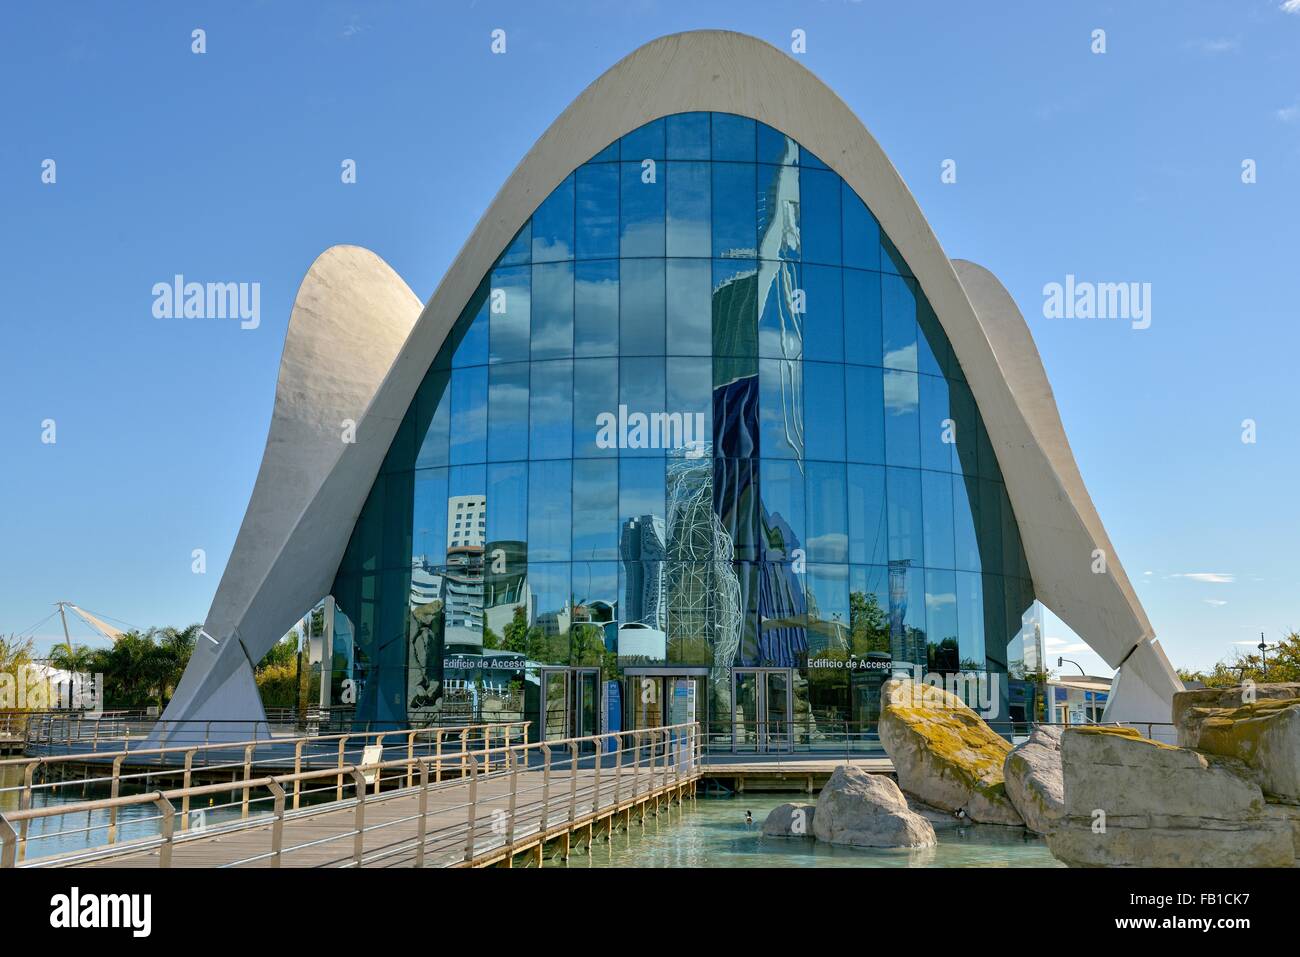 Marine Science Center High Resolution Stock Photography and Images - Alamy